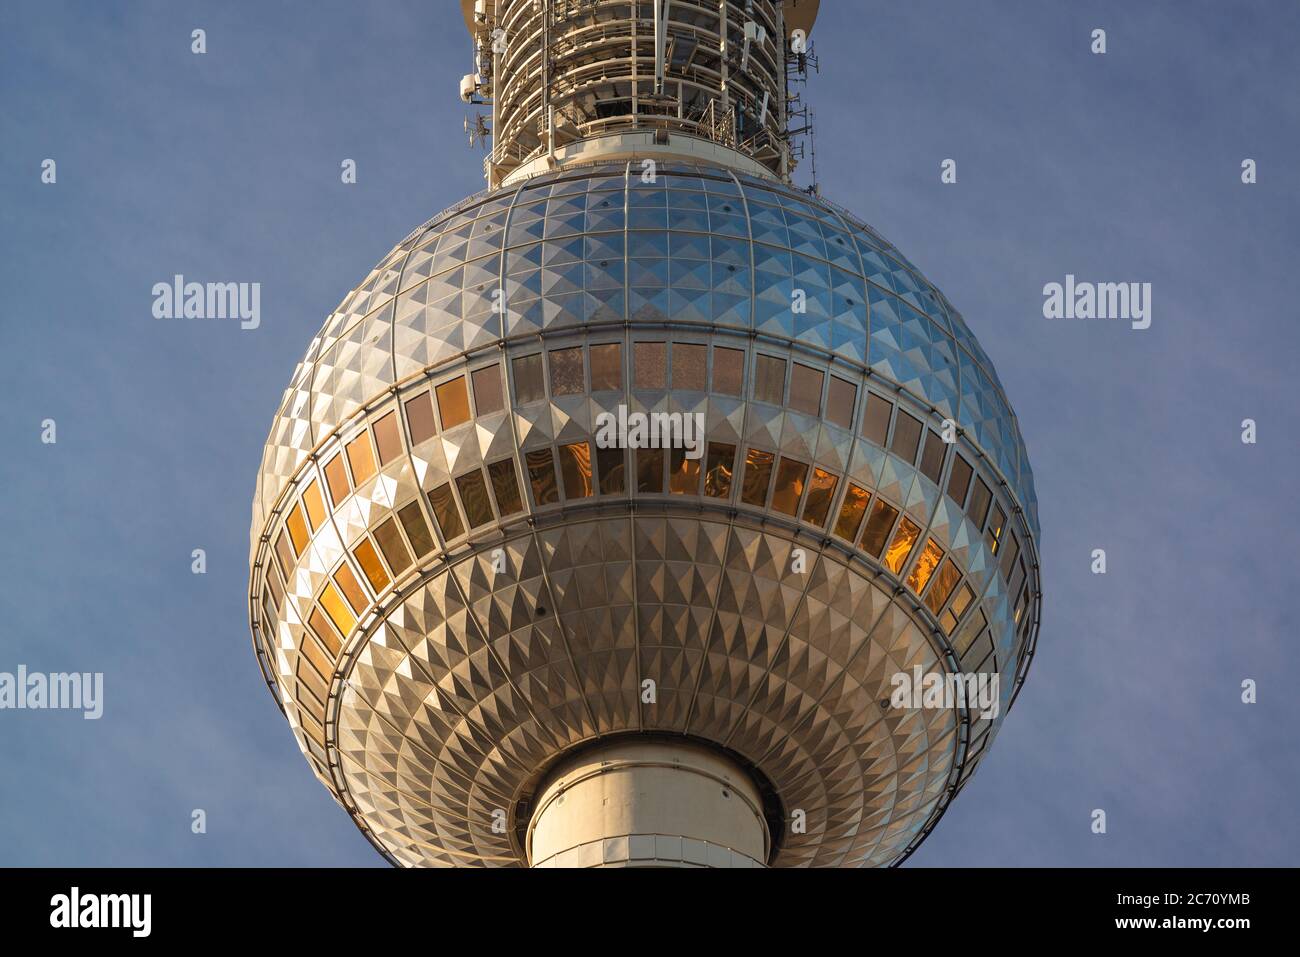 BERLIN, GERMANY - SEPTEMBER 17, 2013: Close up of the Fernsehturm in Berlin. The television tower was completed in 1969. Stock Photo